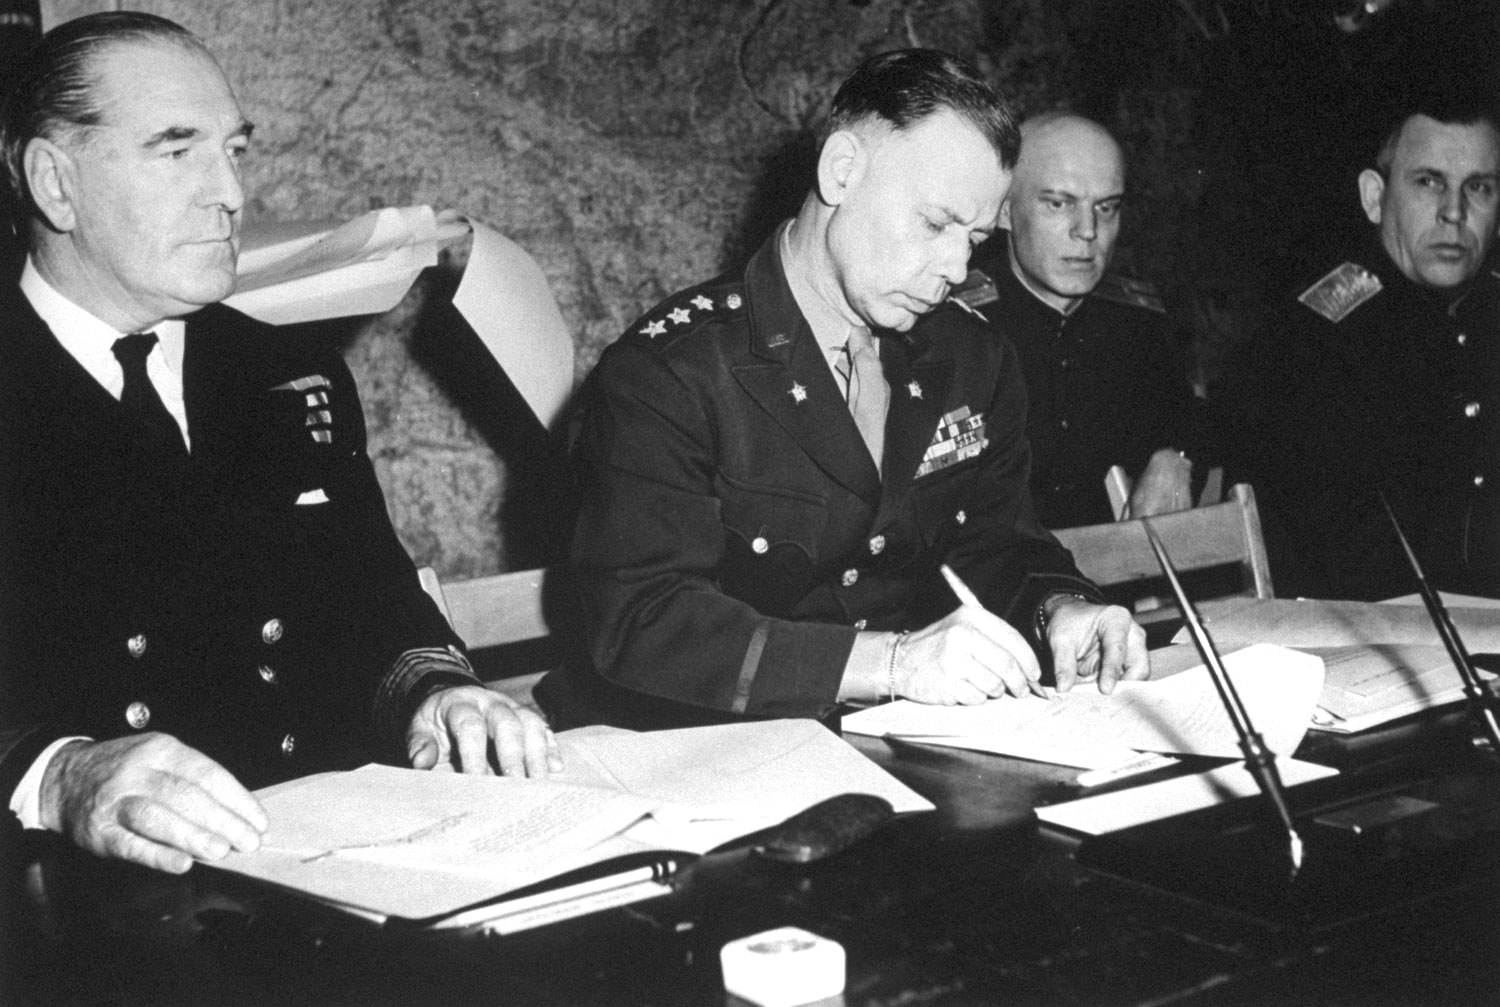 LtGen Bedell Smith signing the documents of Germany’s surrender, Reims, France, 7 May 1945. British Adm Harold Burrough is on the left. Soviet Gen Ivan Susloparov is on the extreme right.